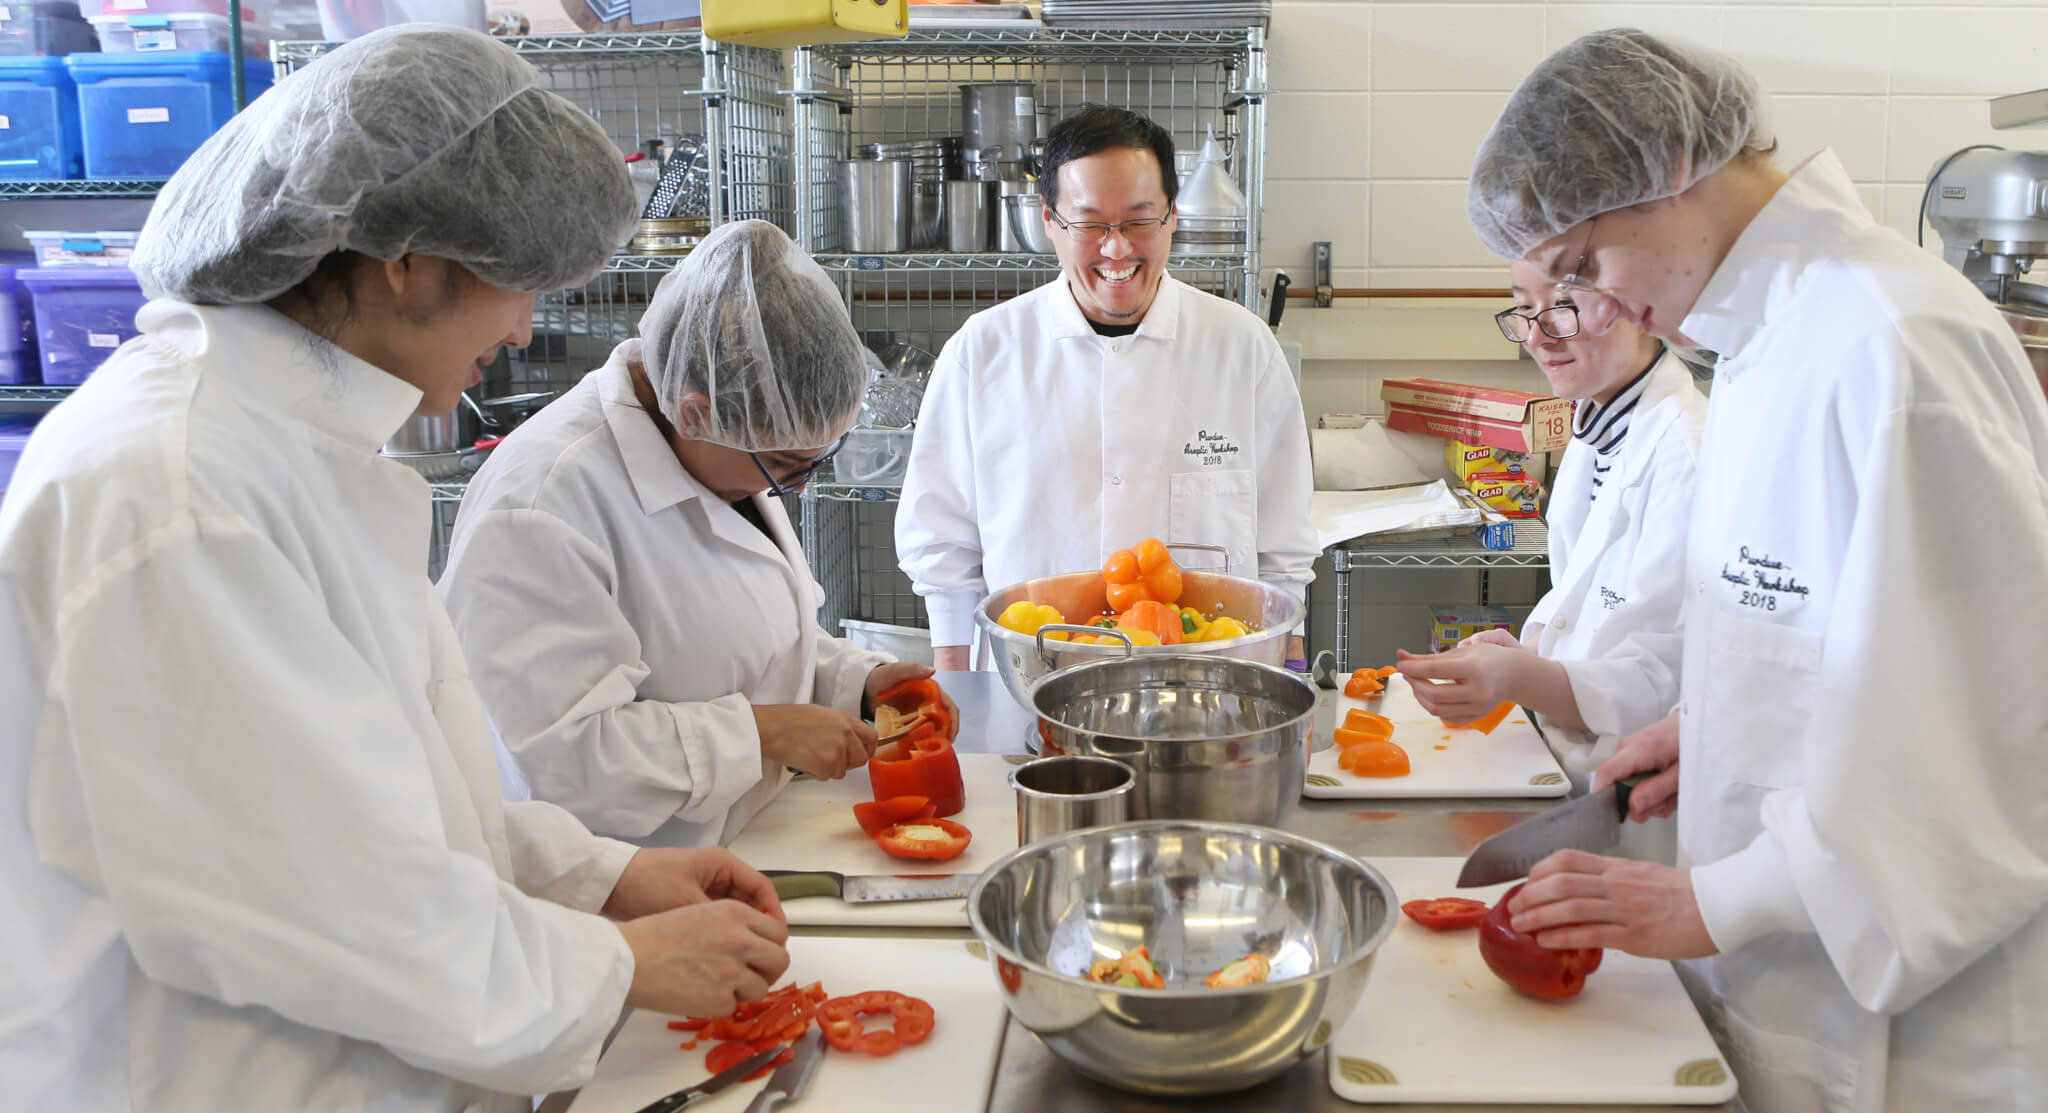 Joseph Yoon working with Food Science students during his visit to Purdue University. Photo credit: Tom Campbell.